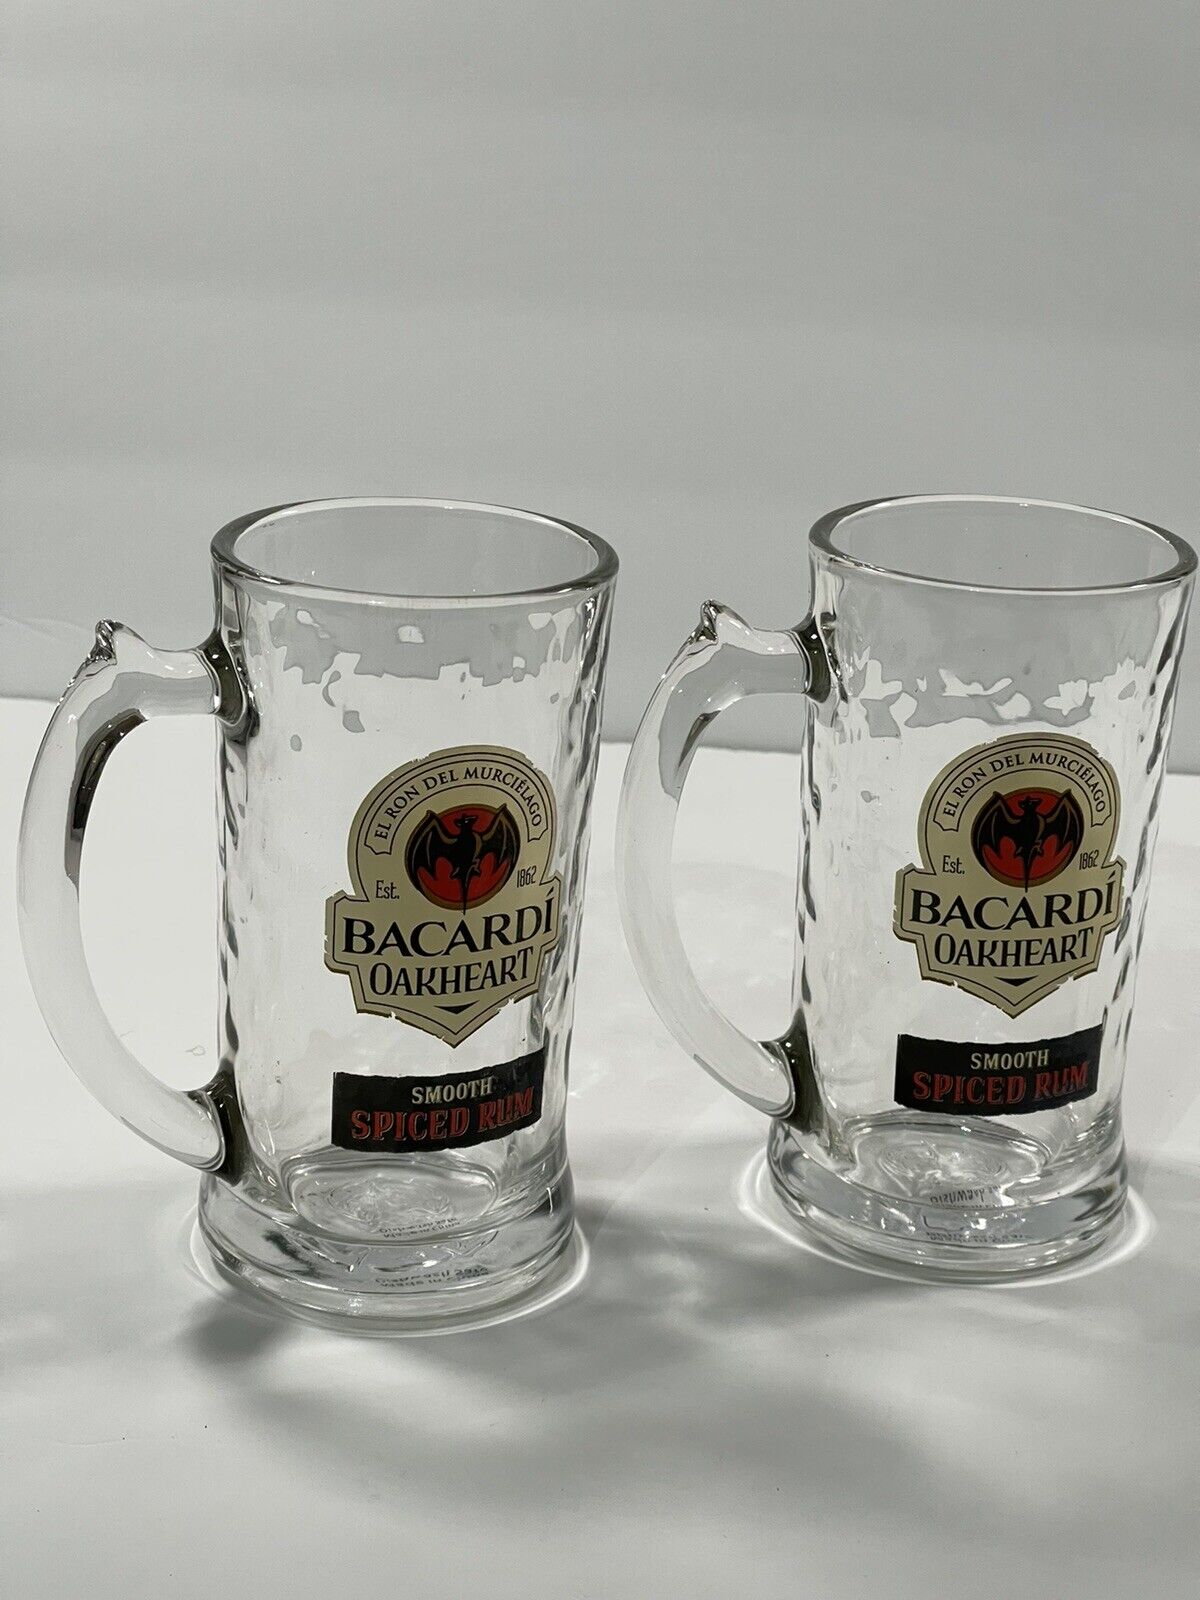 2 Bacardi Oakheart Smooth Spiced Rum Textured Mugs Made In U.s.a.  Approx. 3 X 6